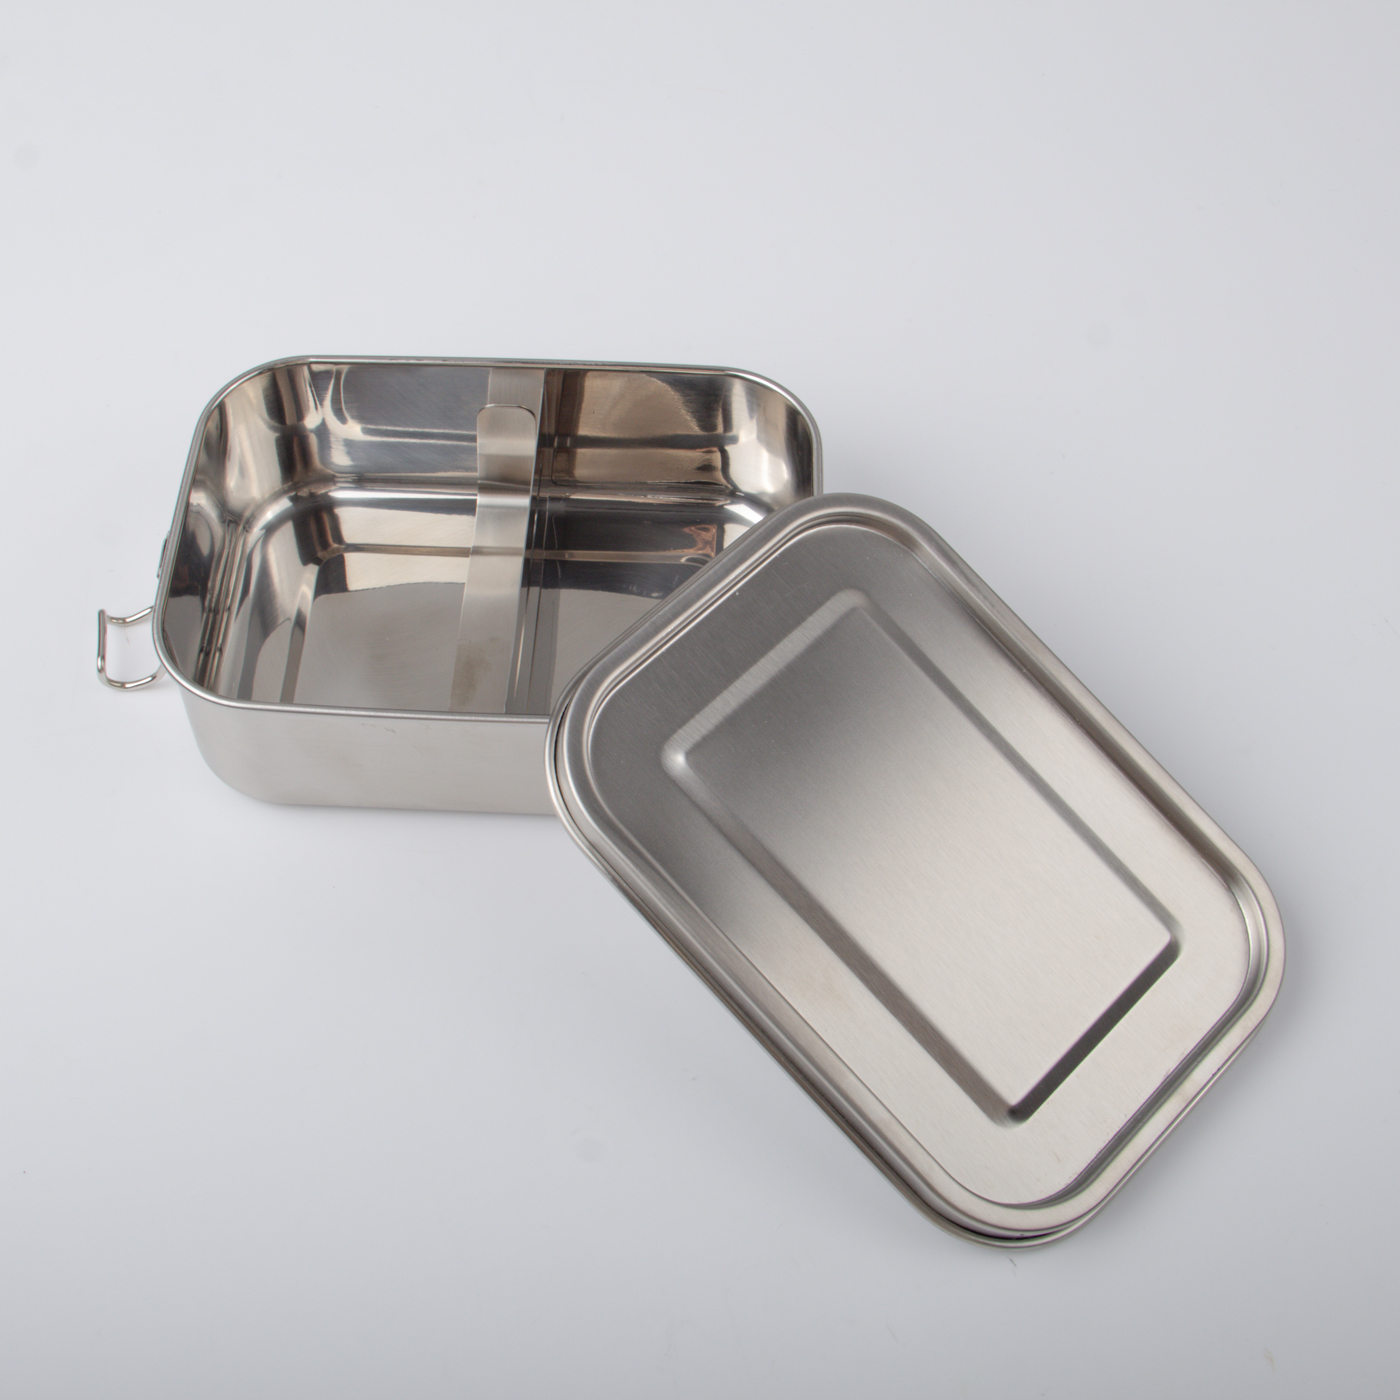 Stainless Steel Lunch Box2